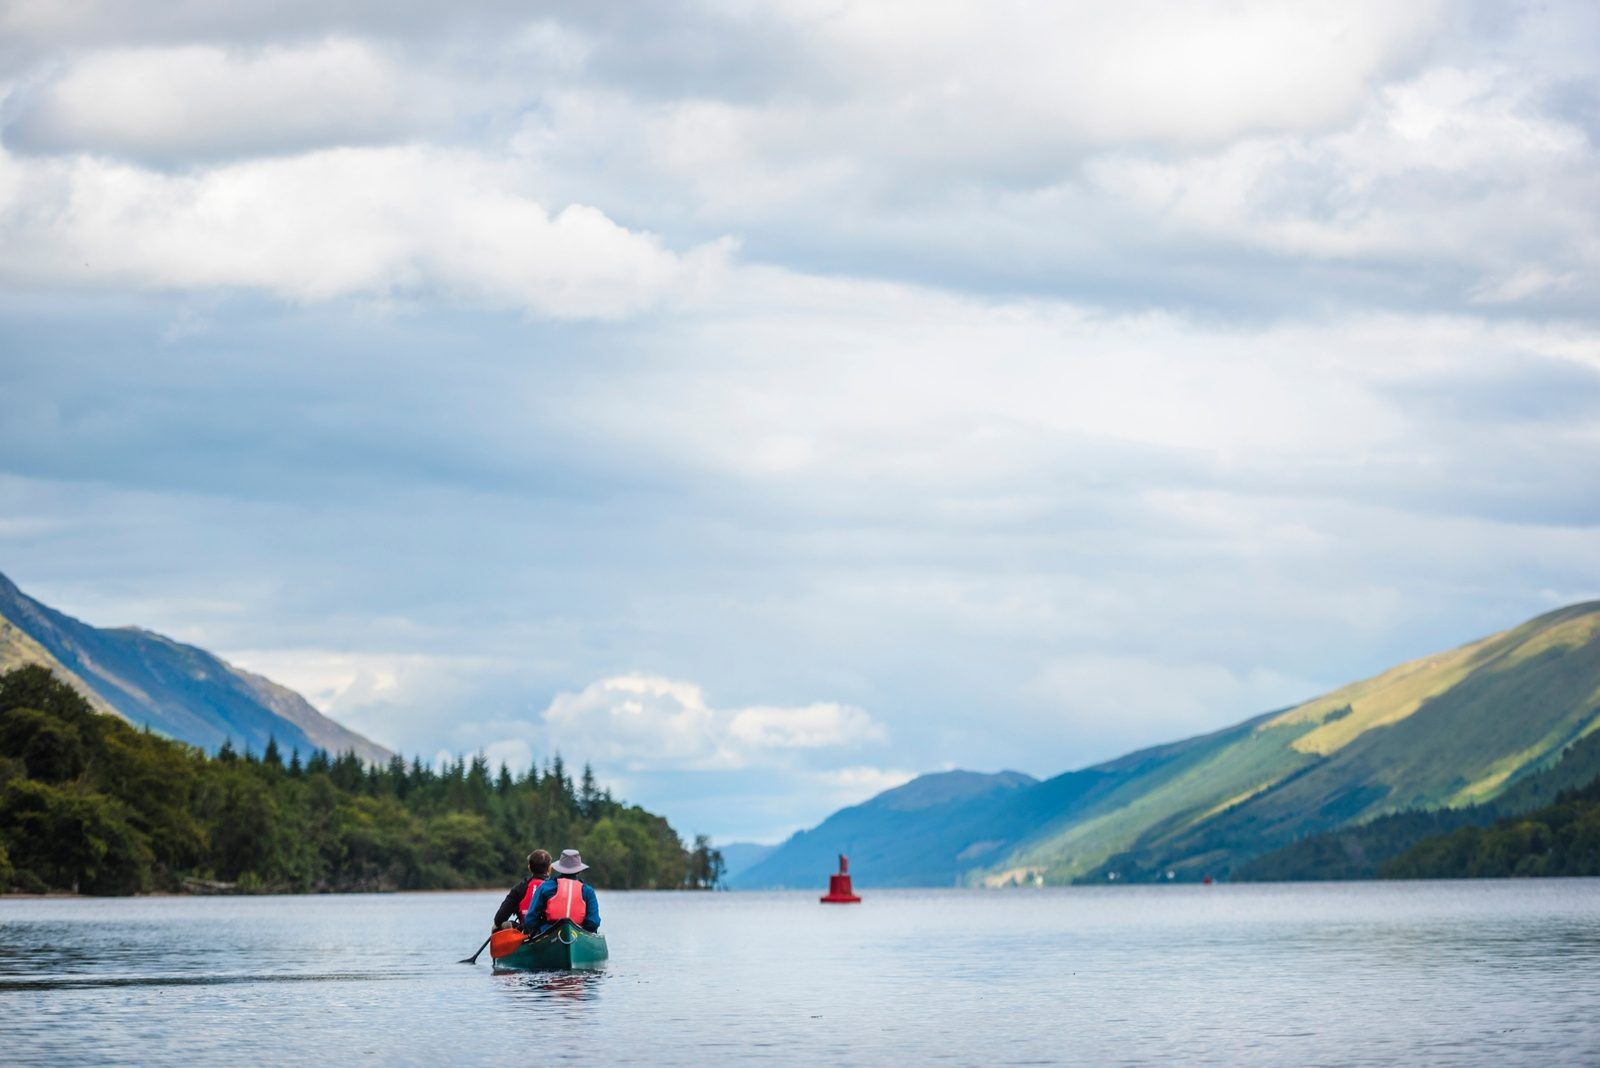 Two people in a canoe on the scenic Caledonian Canal.